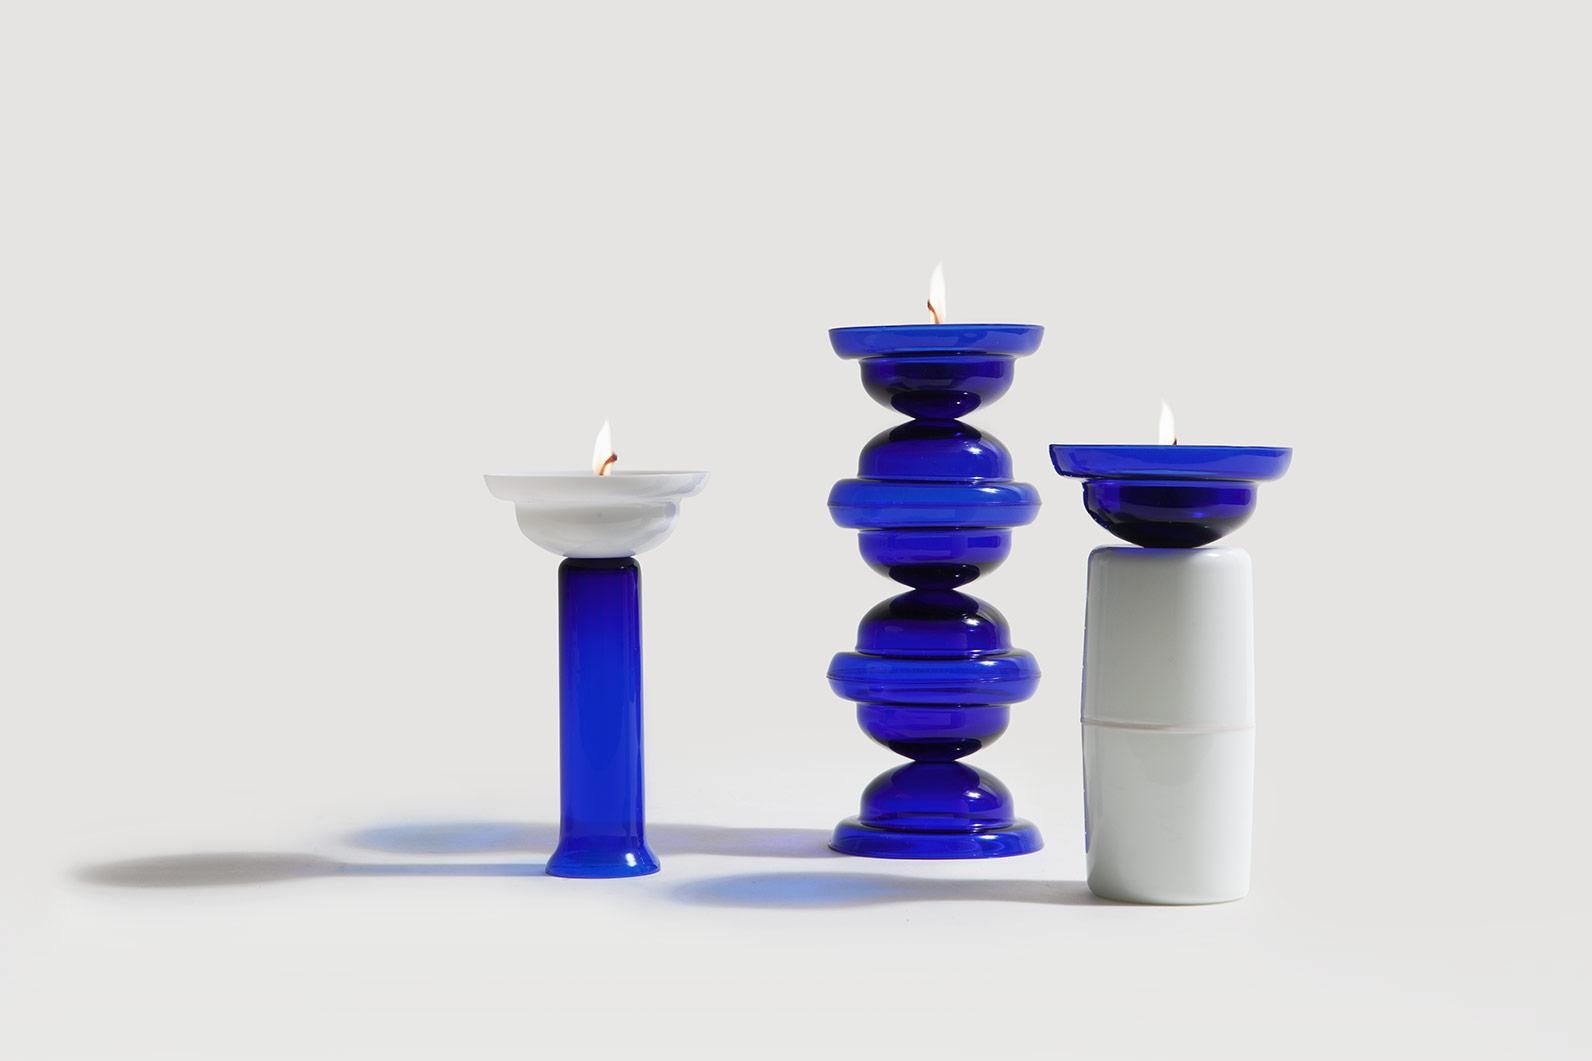 Glazed Candleholder in blue and white glass